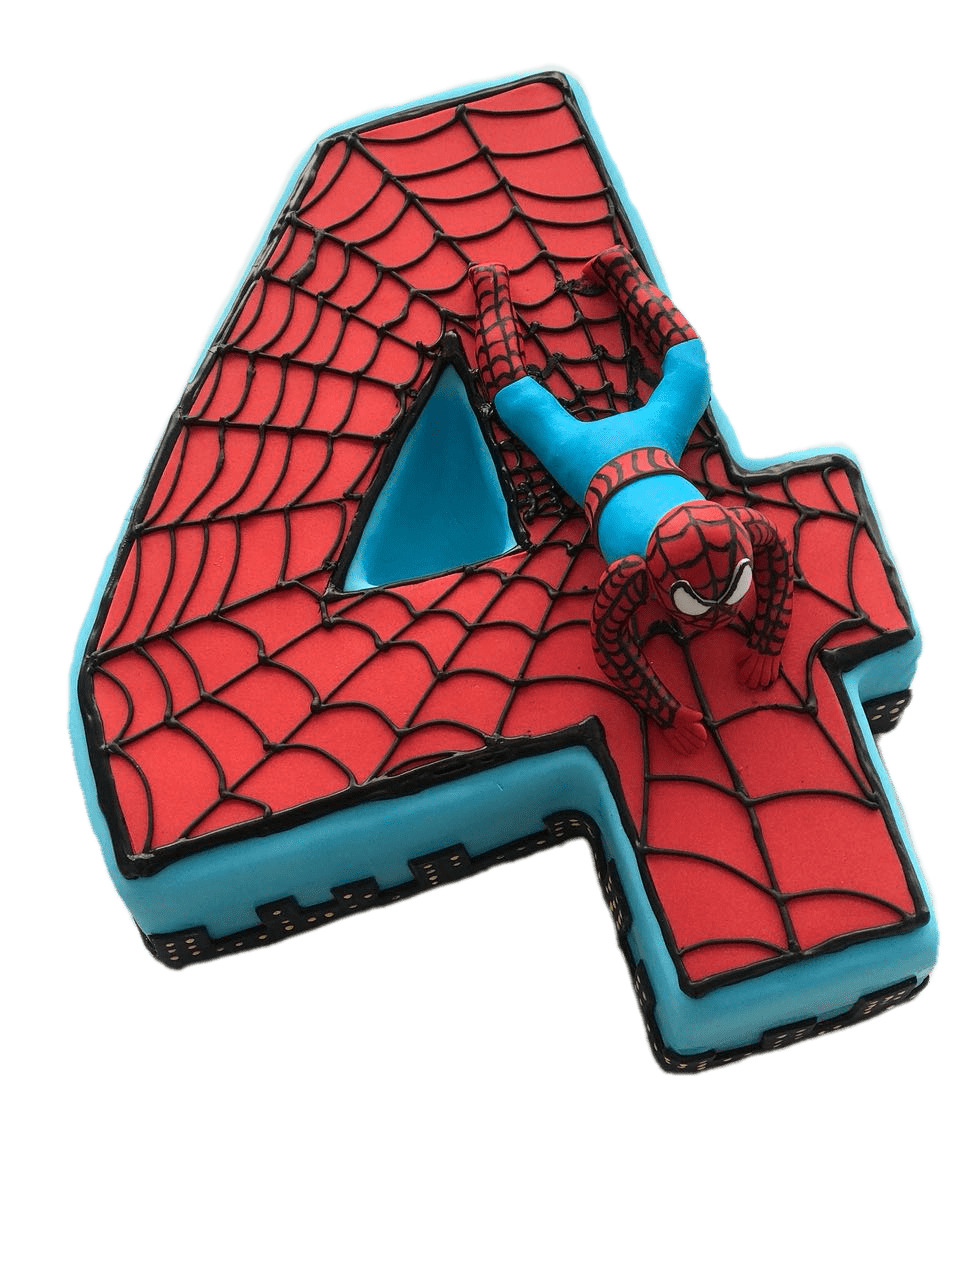 Spiderman Number 4 Cake icons